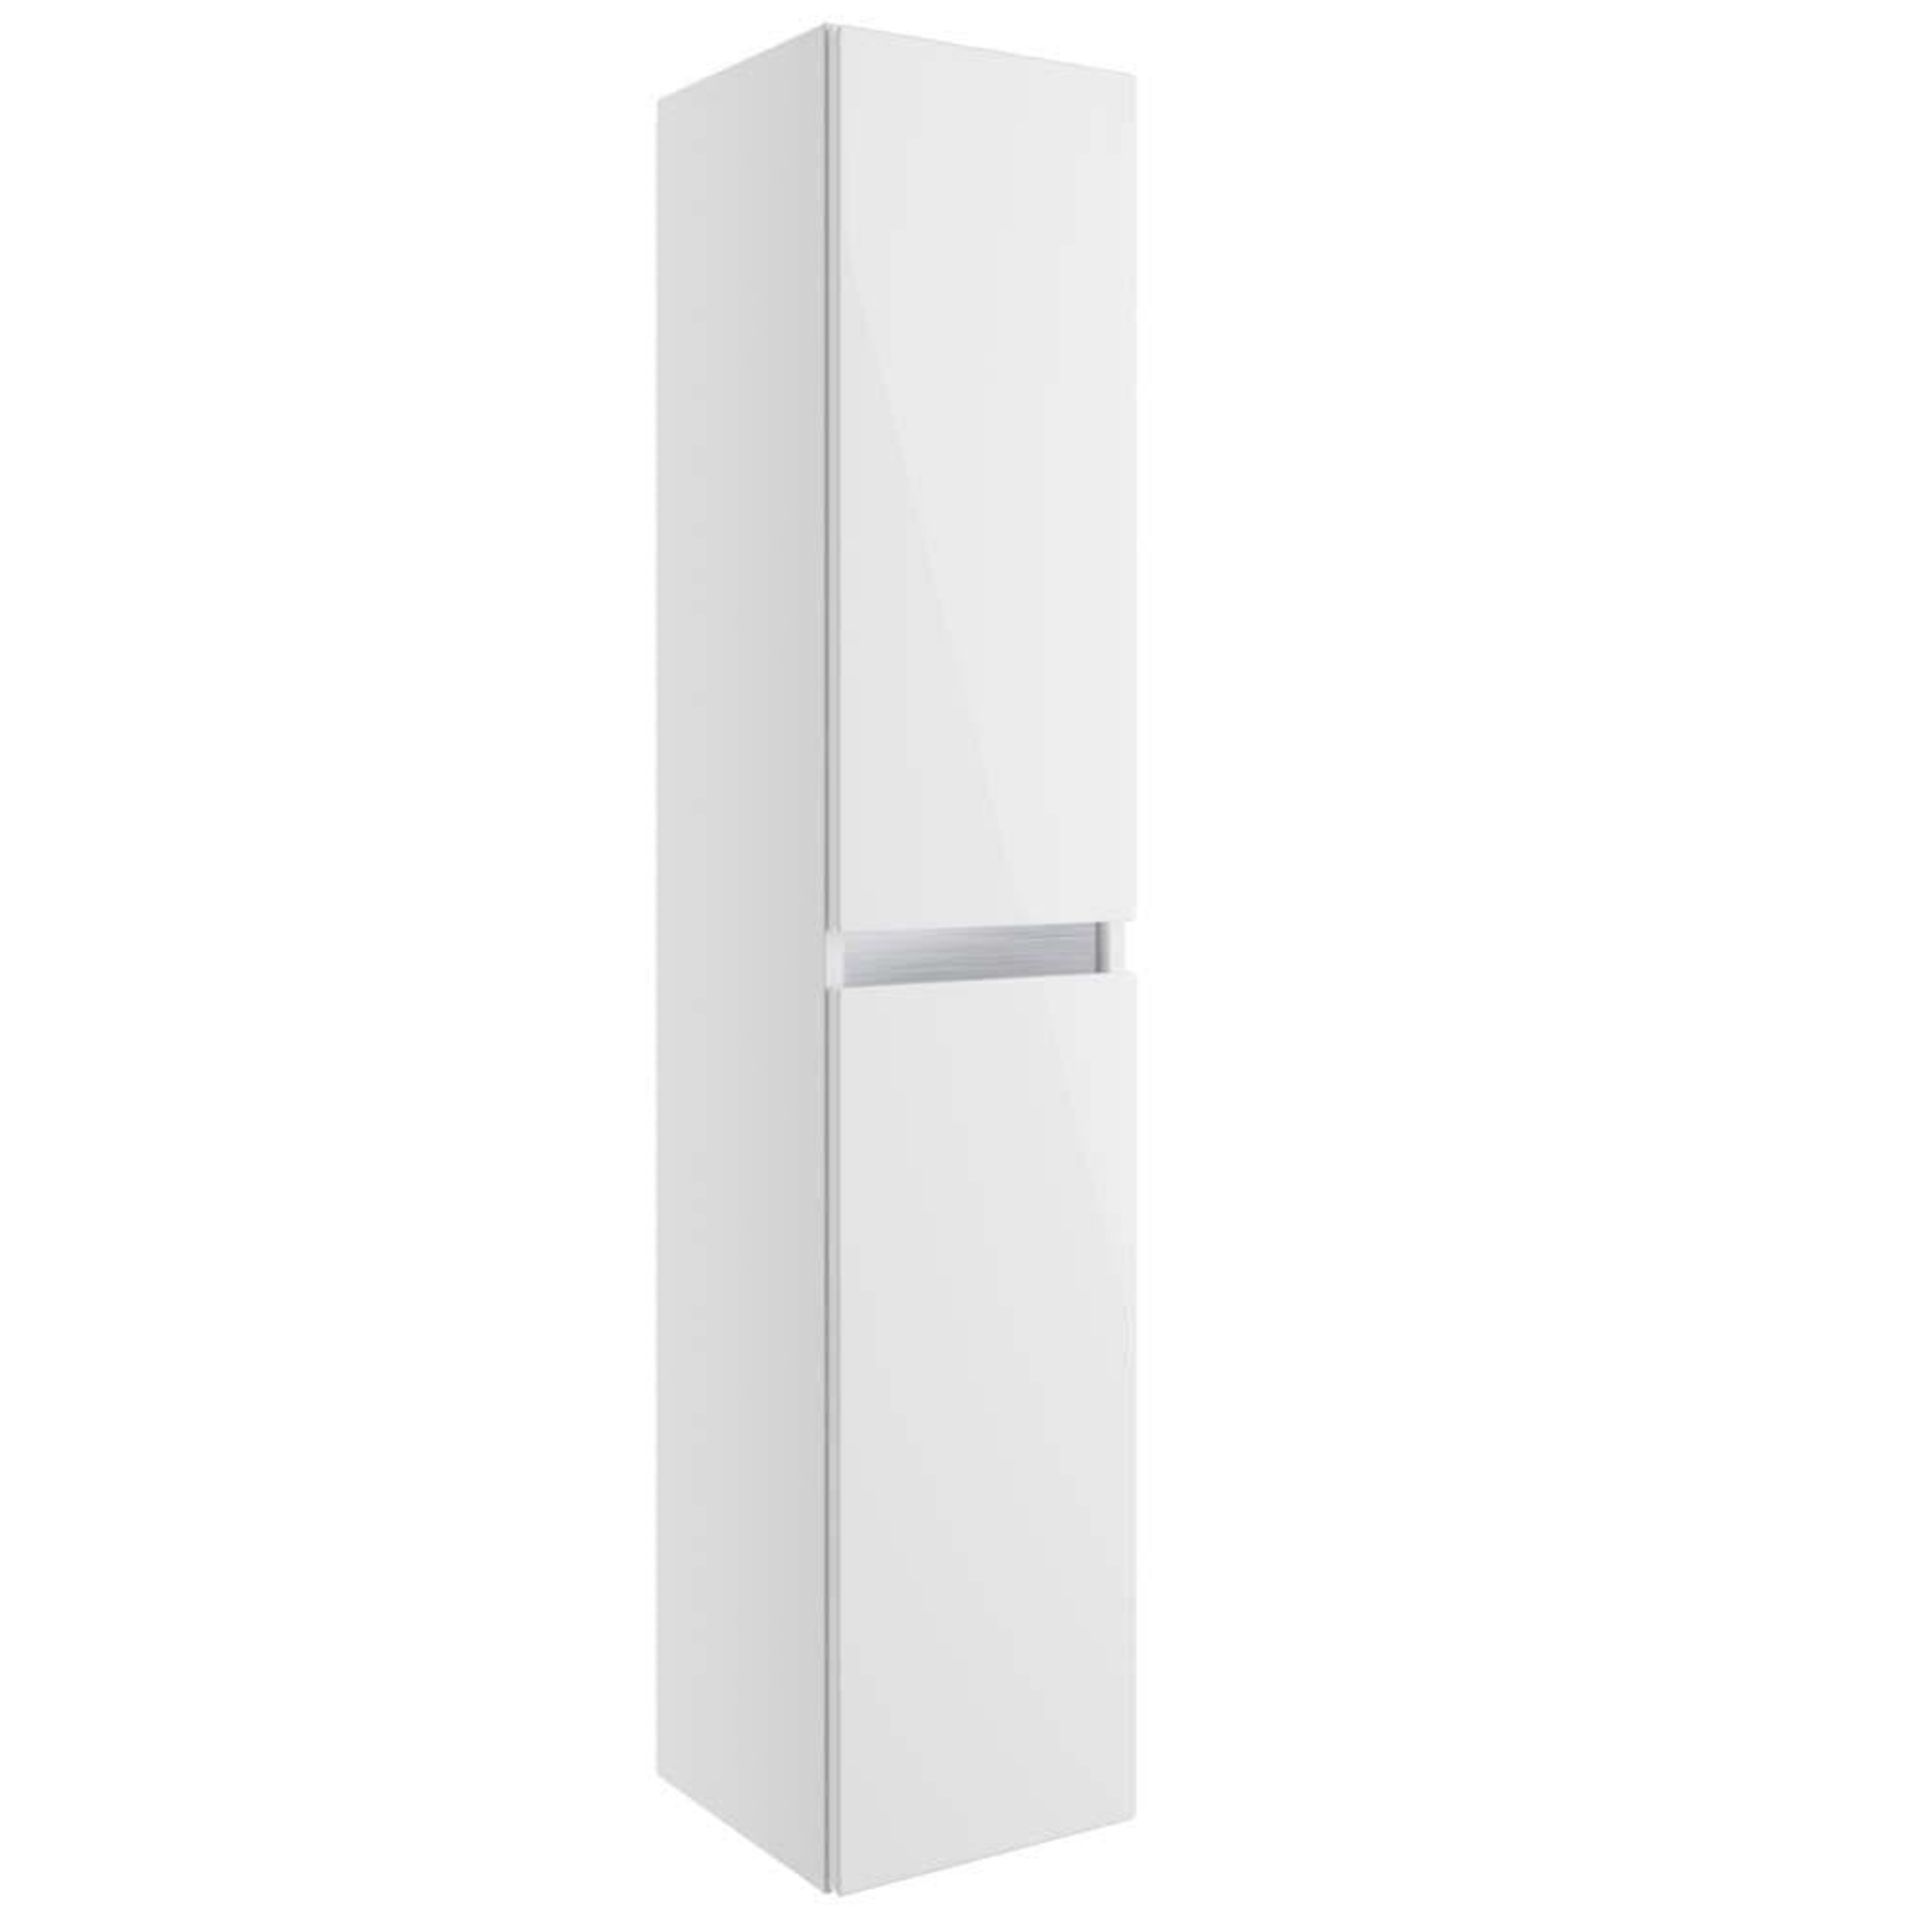 New & Boxed (C8) Carino White Gloss 300mm Two Door Tall Unit. 00mm x 1500mm tall storage cupbo... - Image 2 of 3